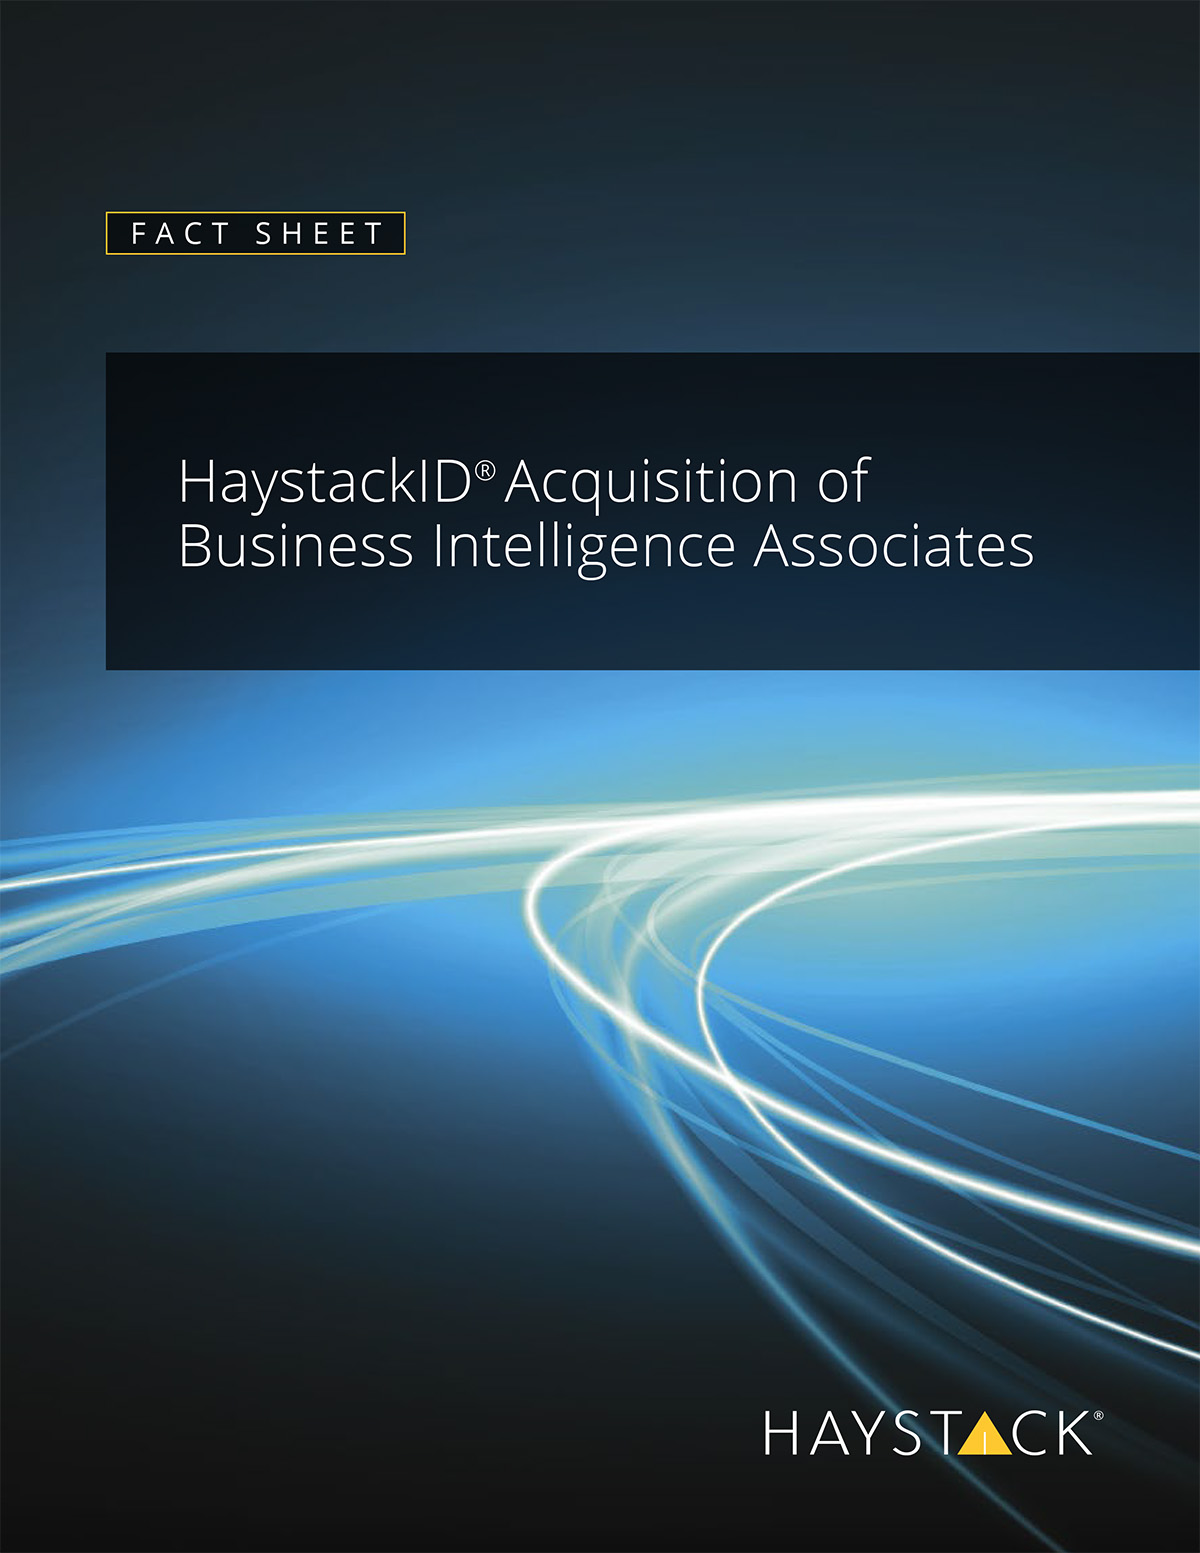 HaystackID - Acquisition of Business Intelligence Associates - Fact Sheet Cover